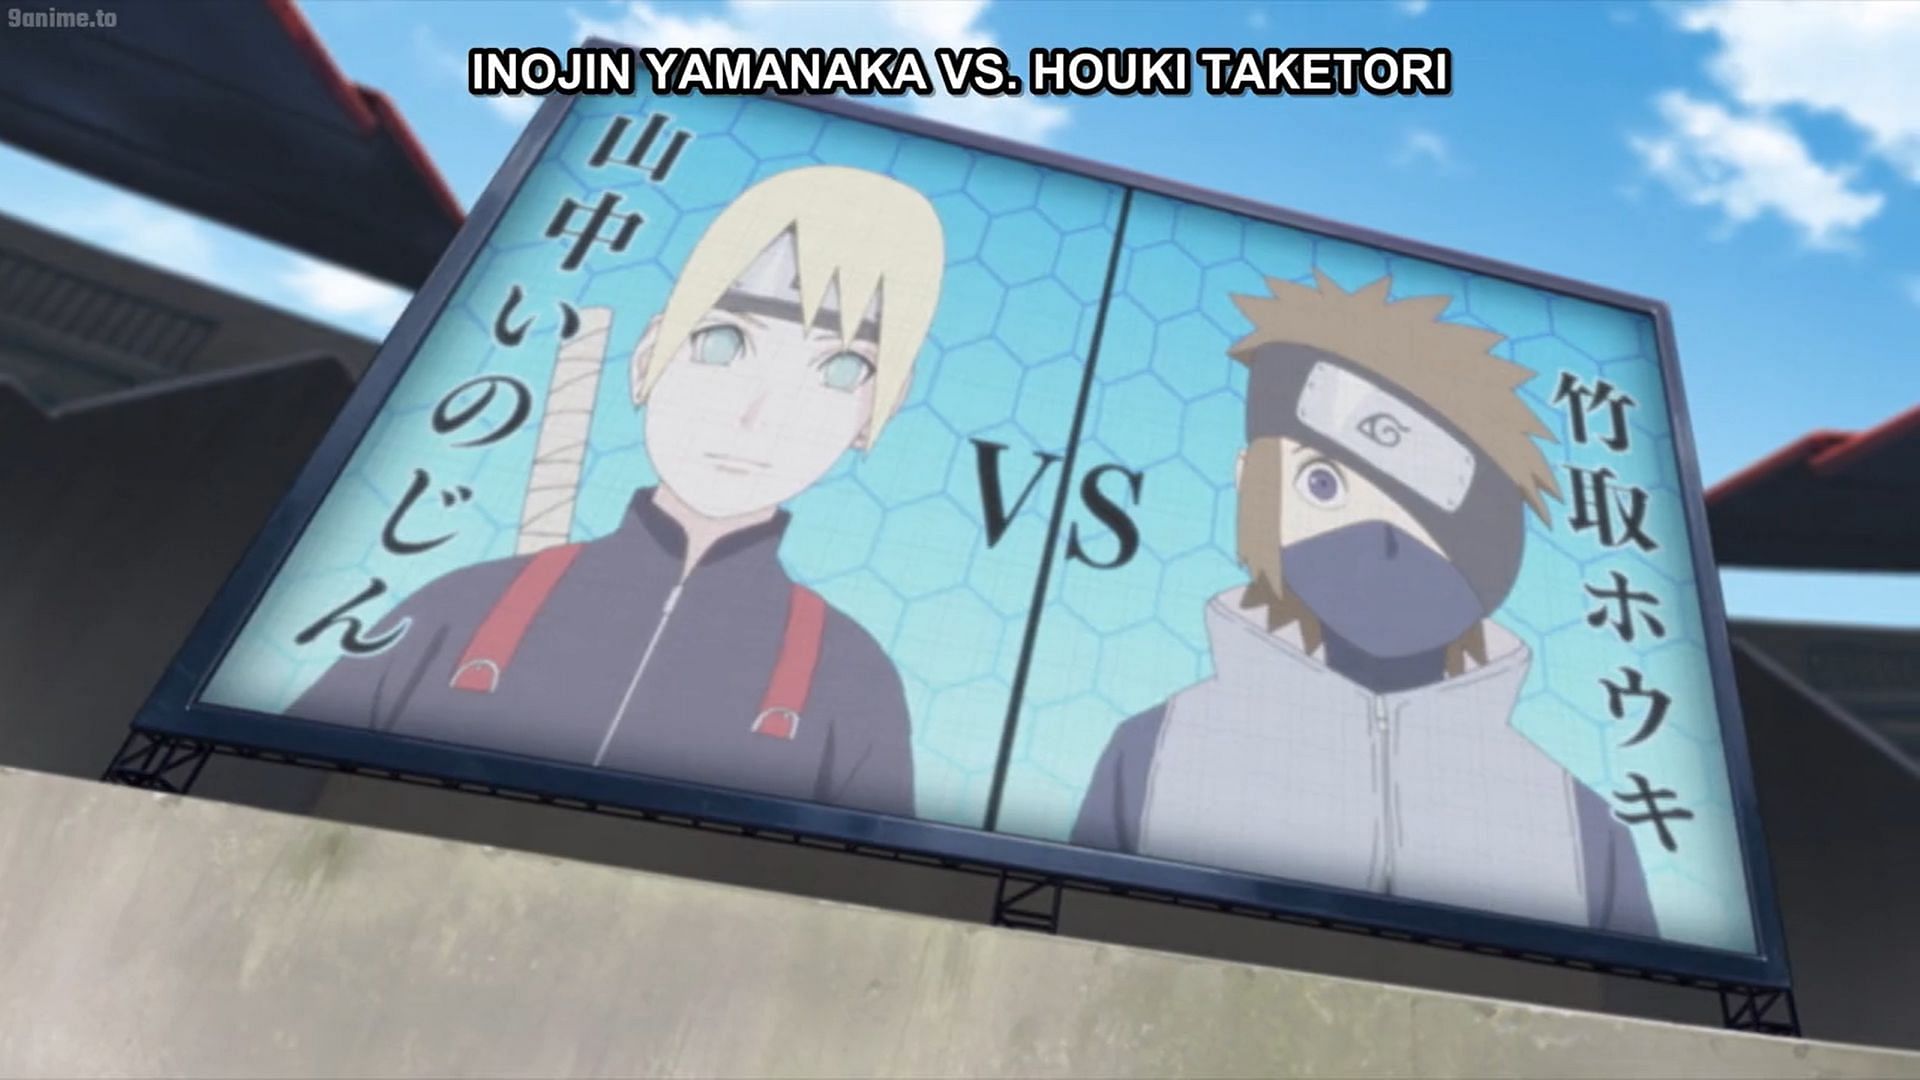 The first match of the final exams Chunin one on one (Image credit: YouTube)